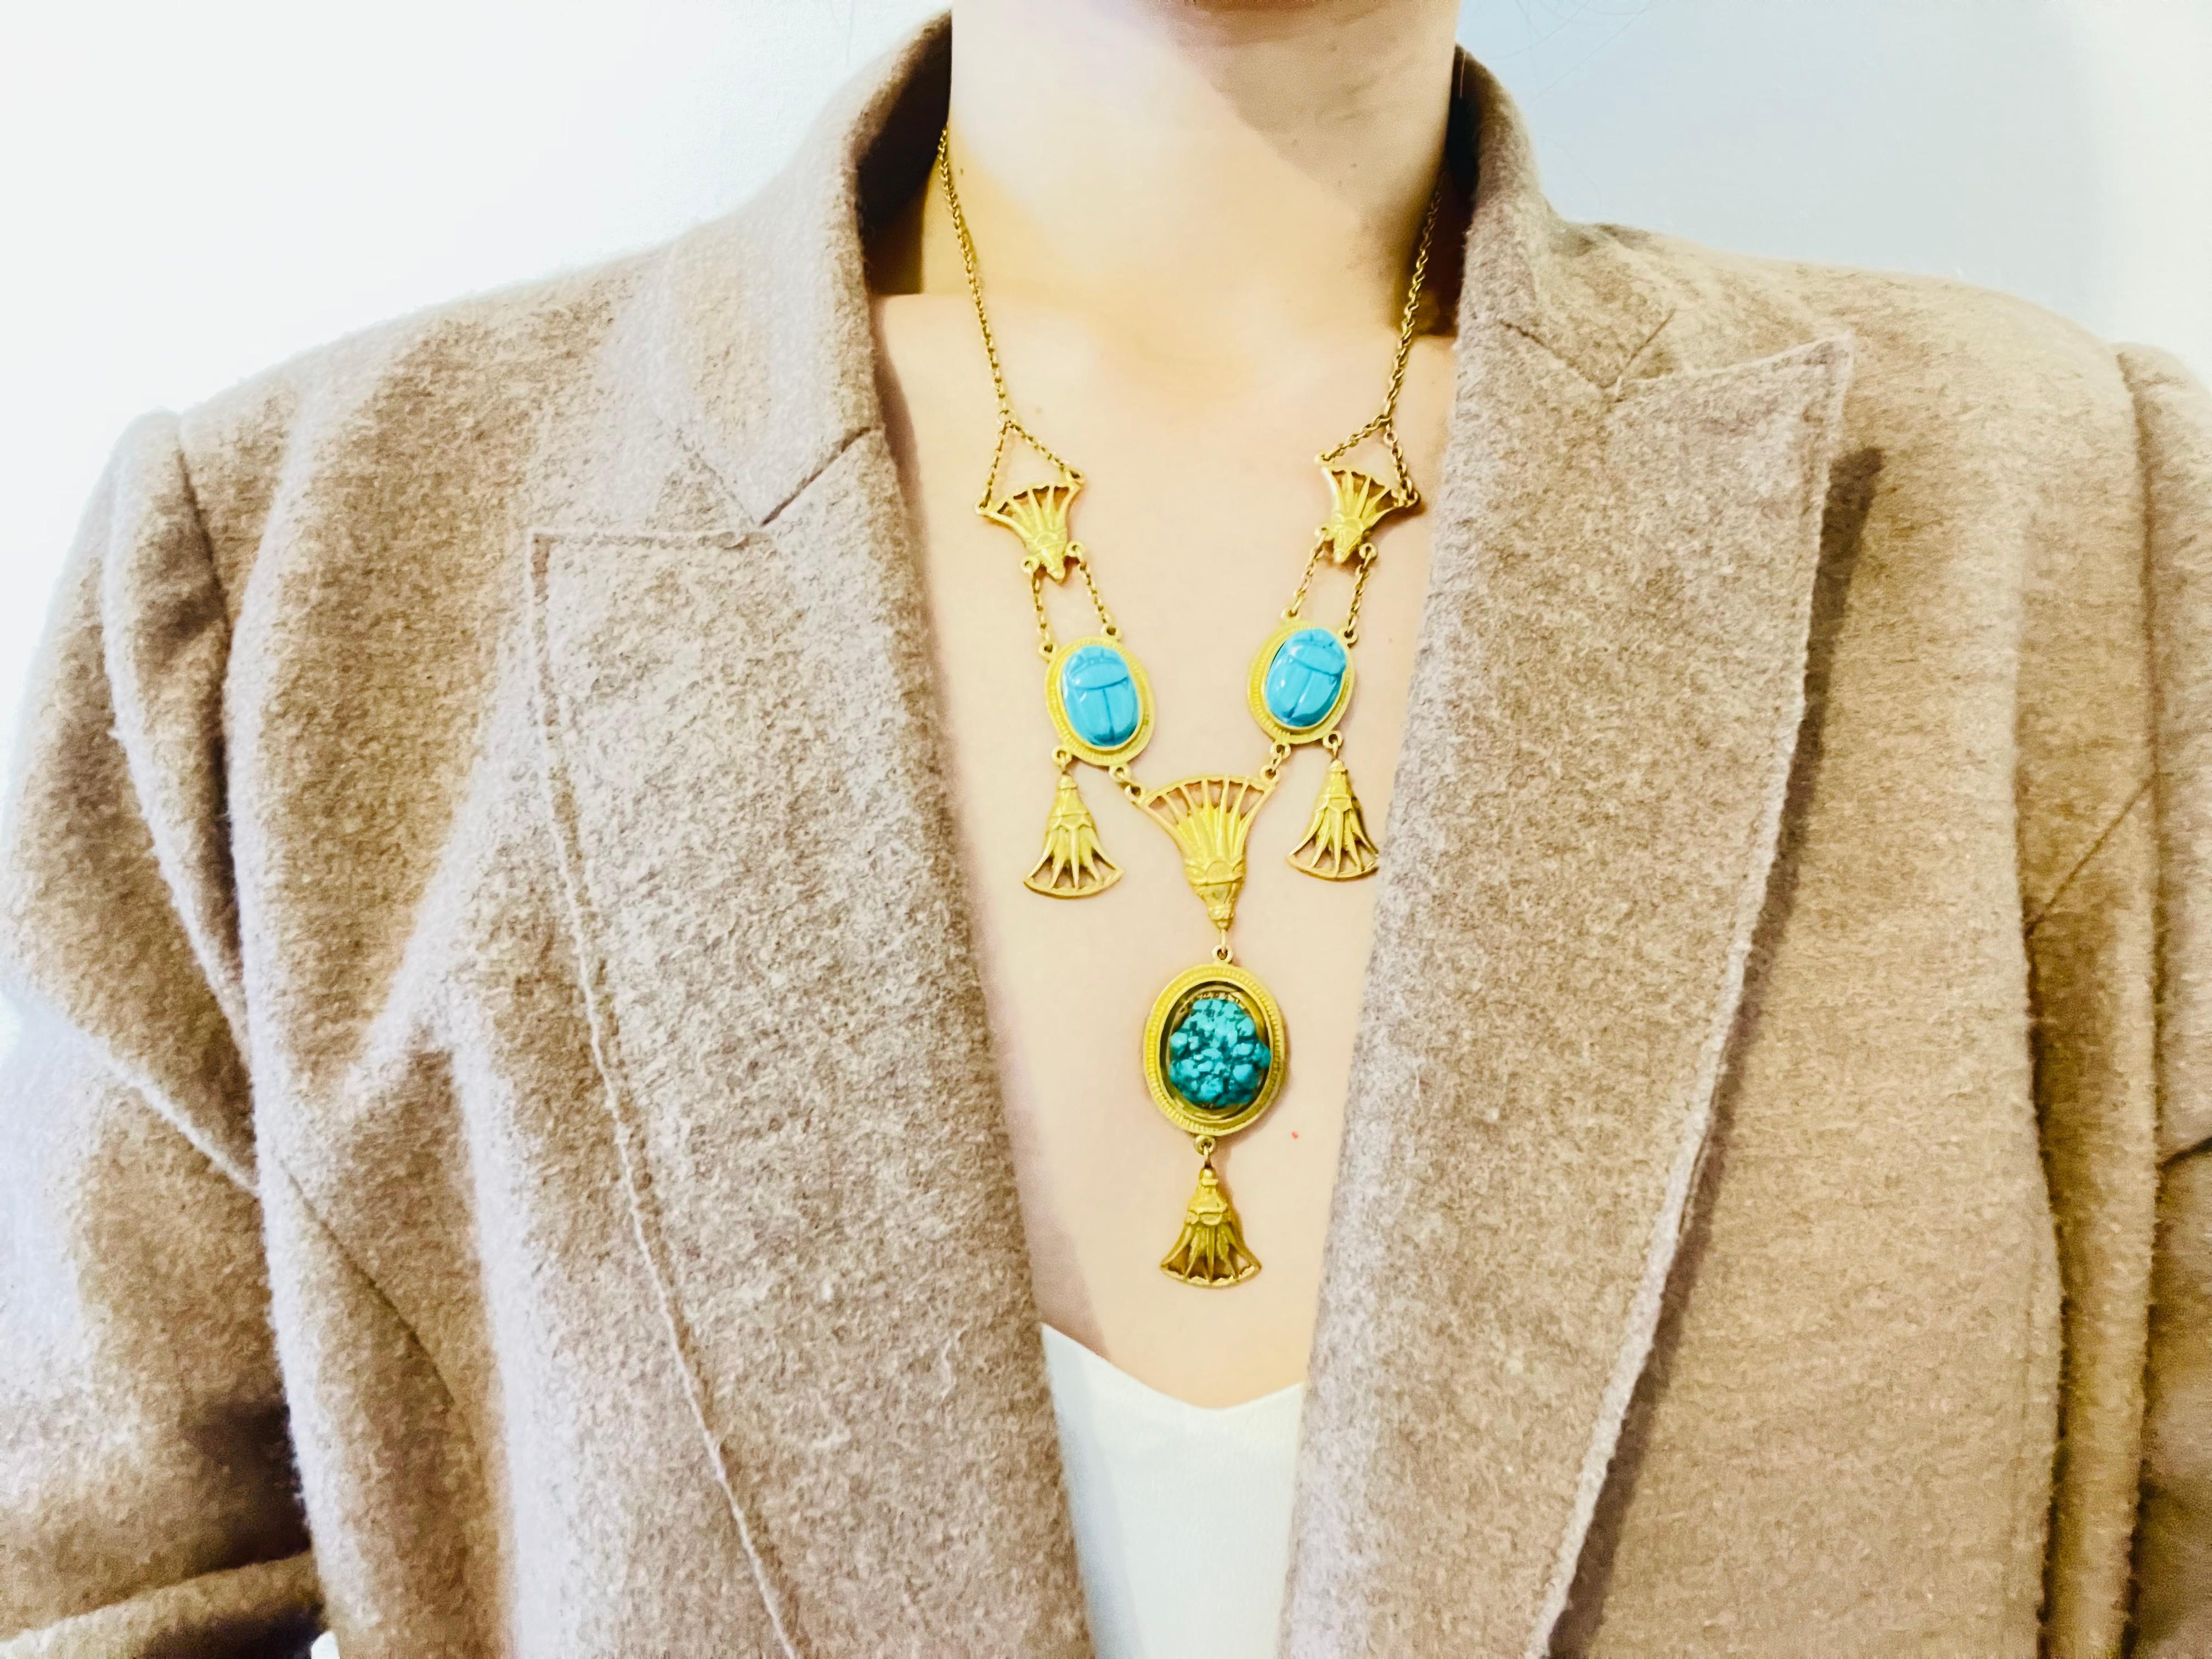 CHRISTIAN DIOR by John Galliano 2004 Egyptian Revival Turquoise Scarab Necklace For Sale 2